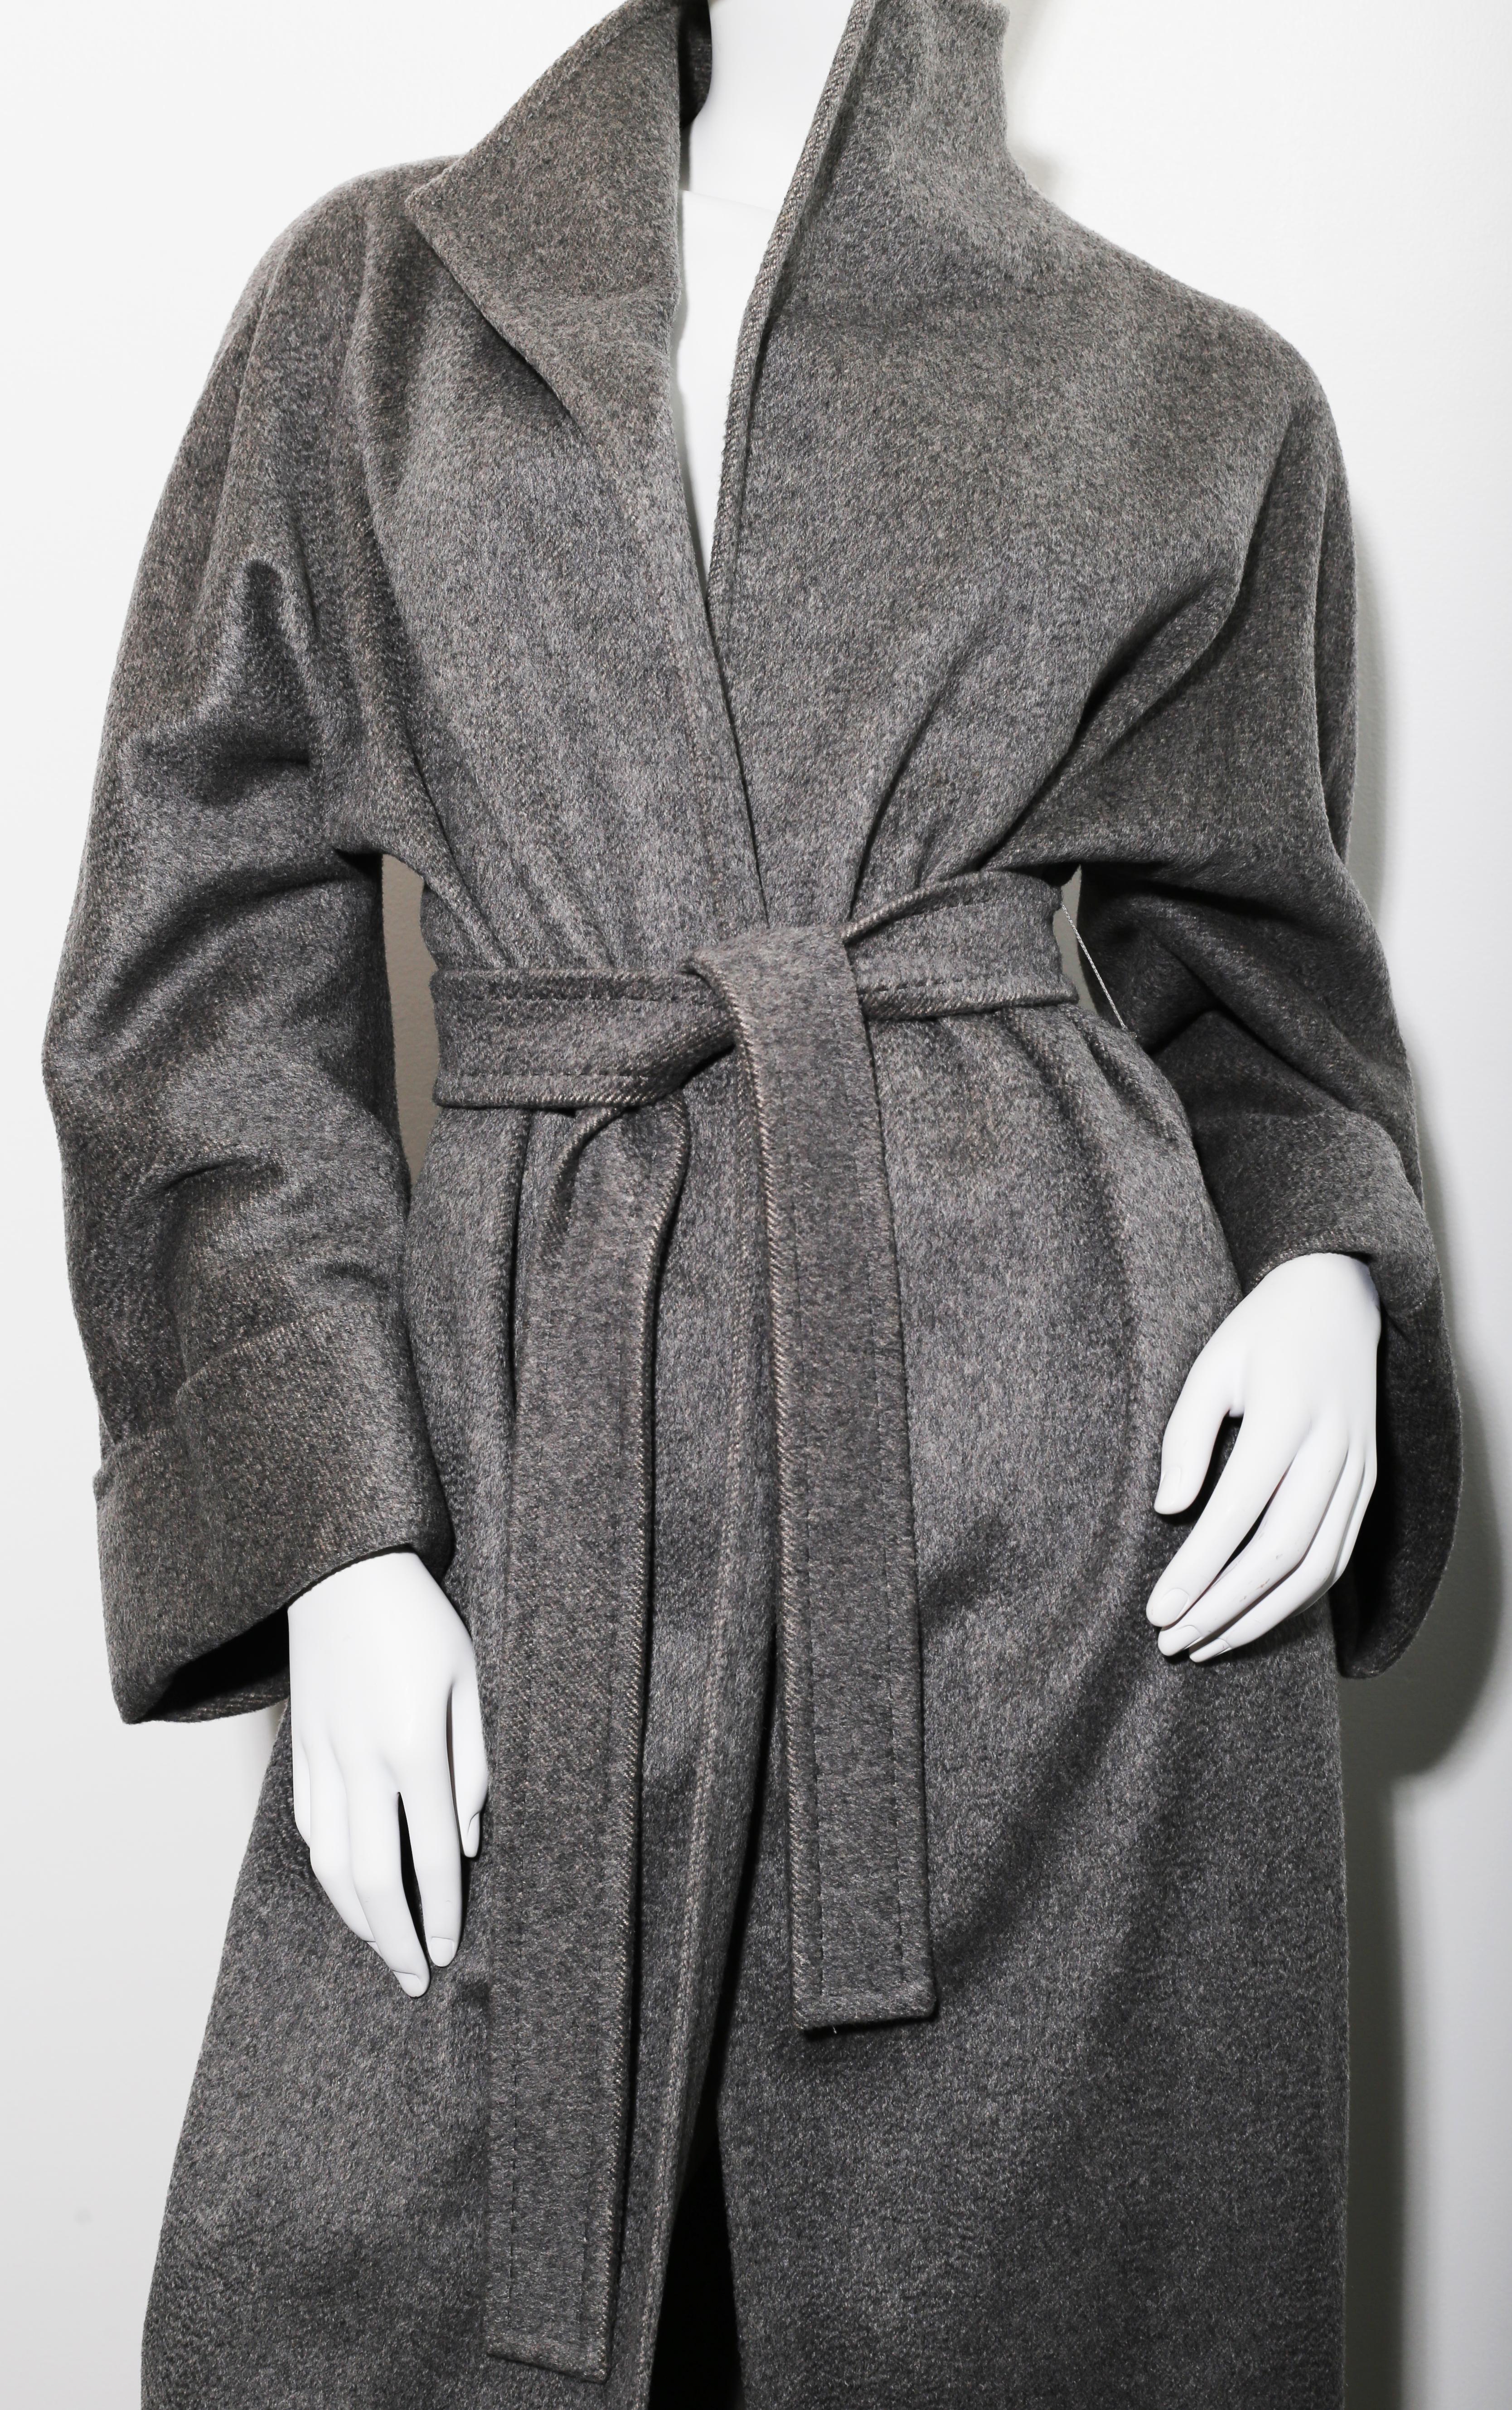 Max Mara Belted Coat is pure luxury defined
Features supremely soft cashmere in timeless grey
 Raglan sleeves, two slanted welt pockets, shawl collar and pick-stitched belt complete this classic look. Fully lined in viscose with oversized 